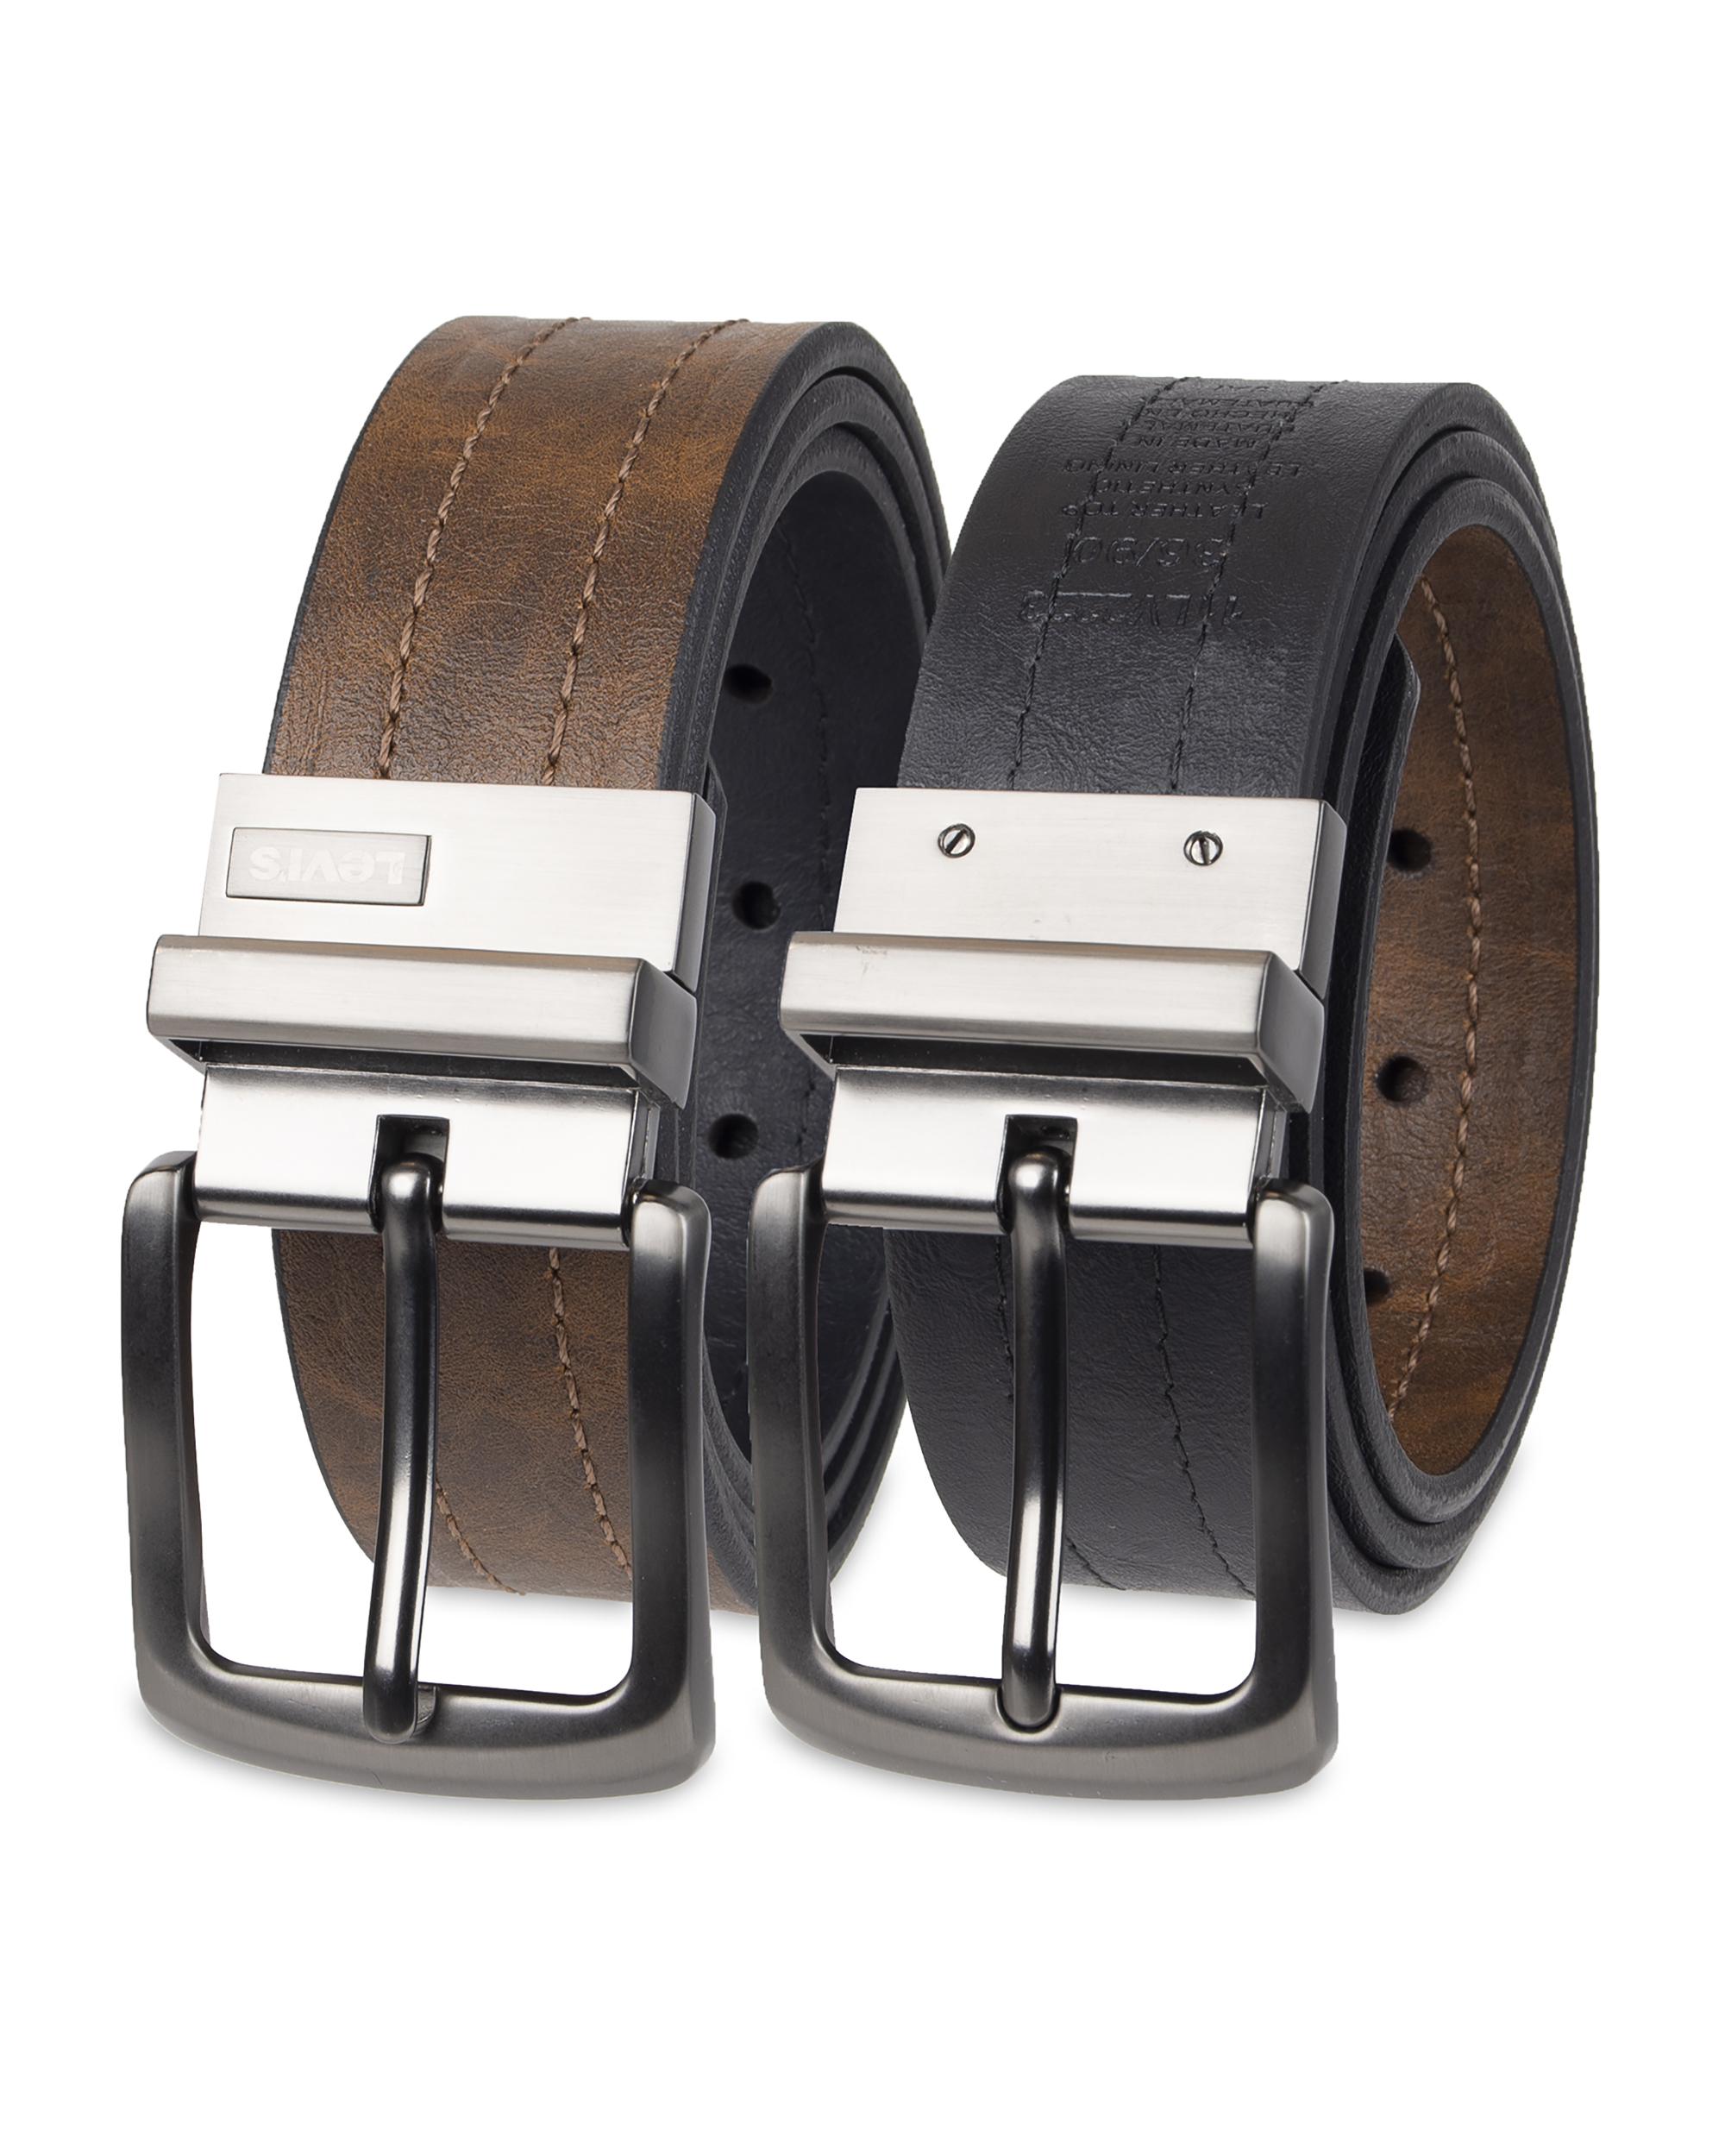 Levi's Men's Two-in-One Reversible Casual Belt, Brown/Black - image 5 of 8